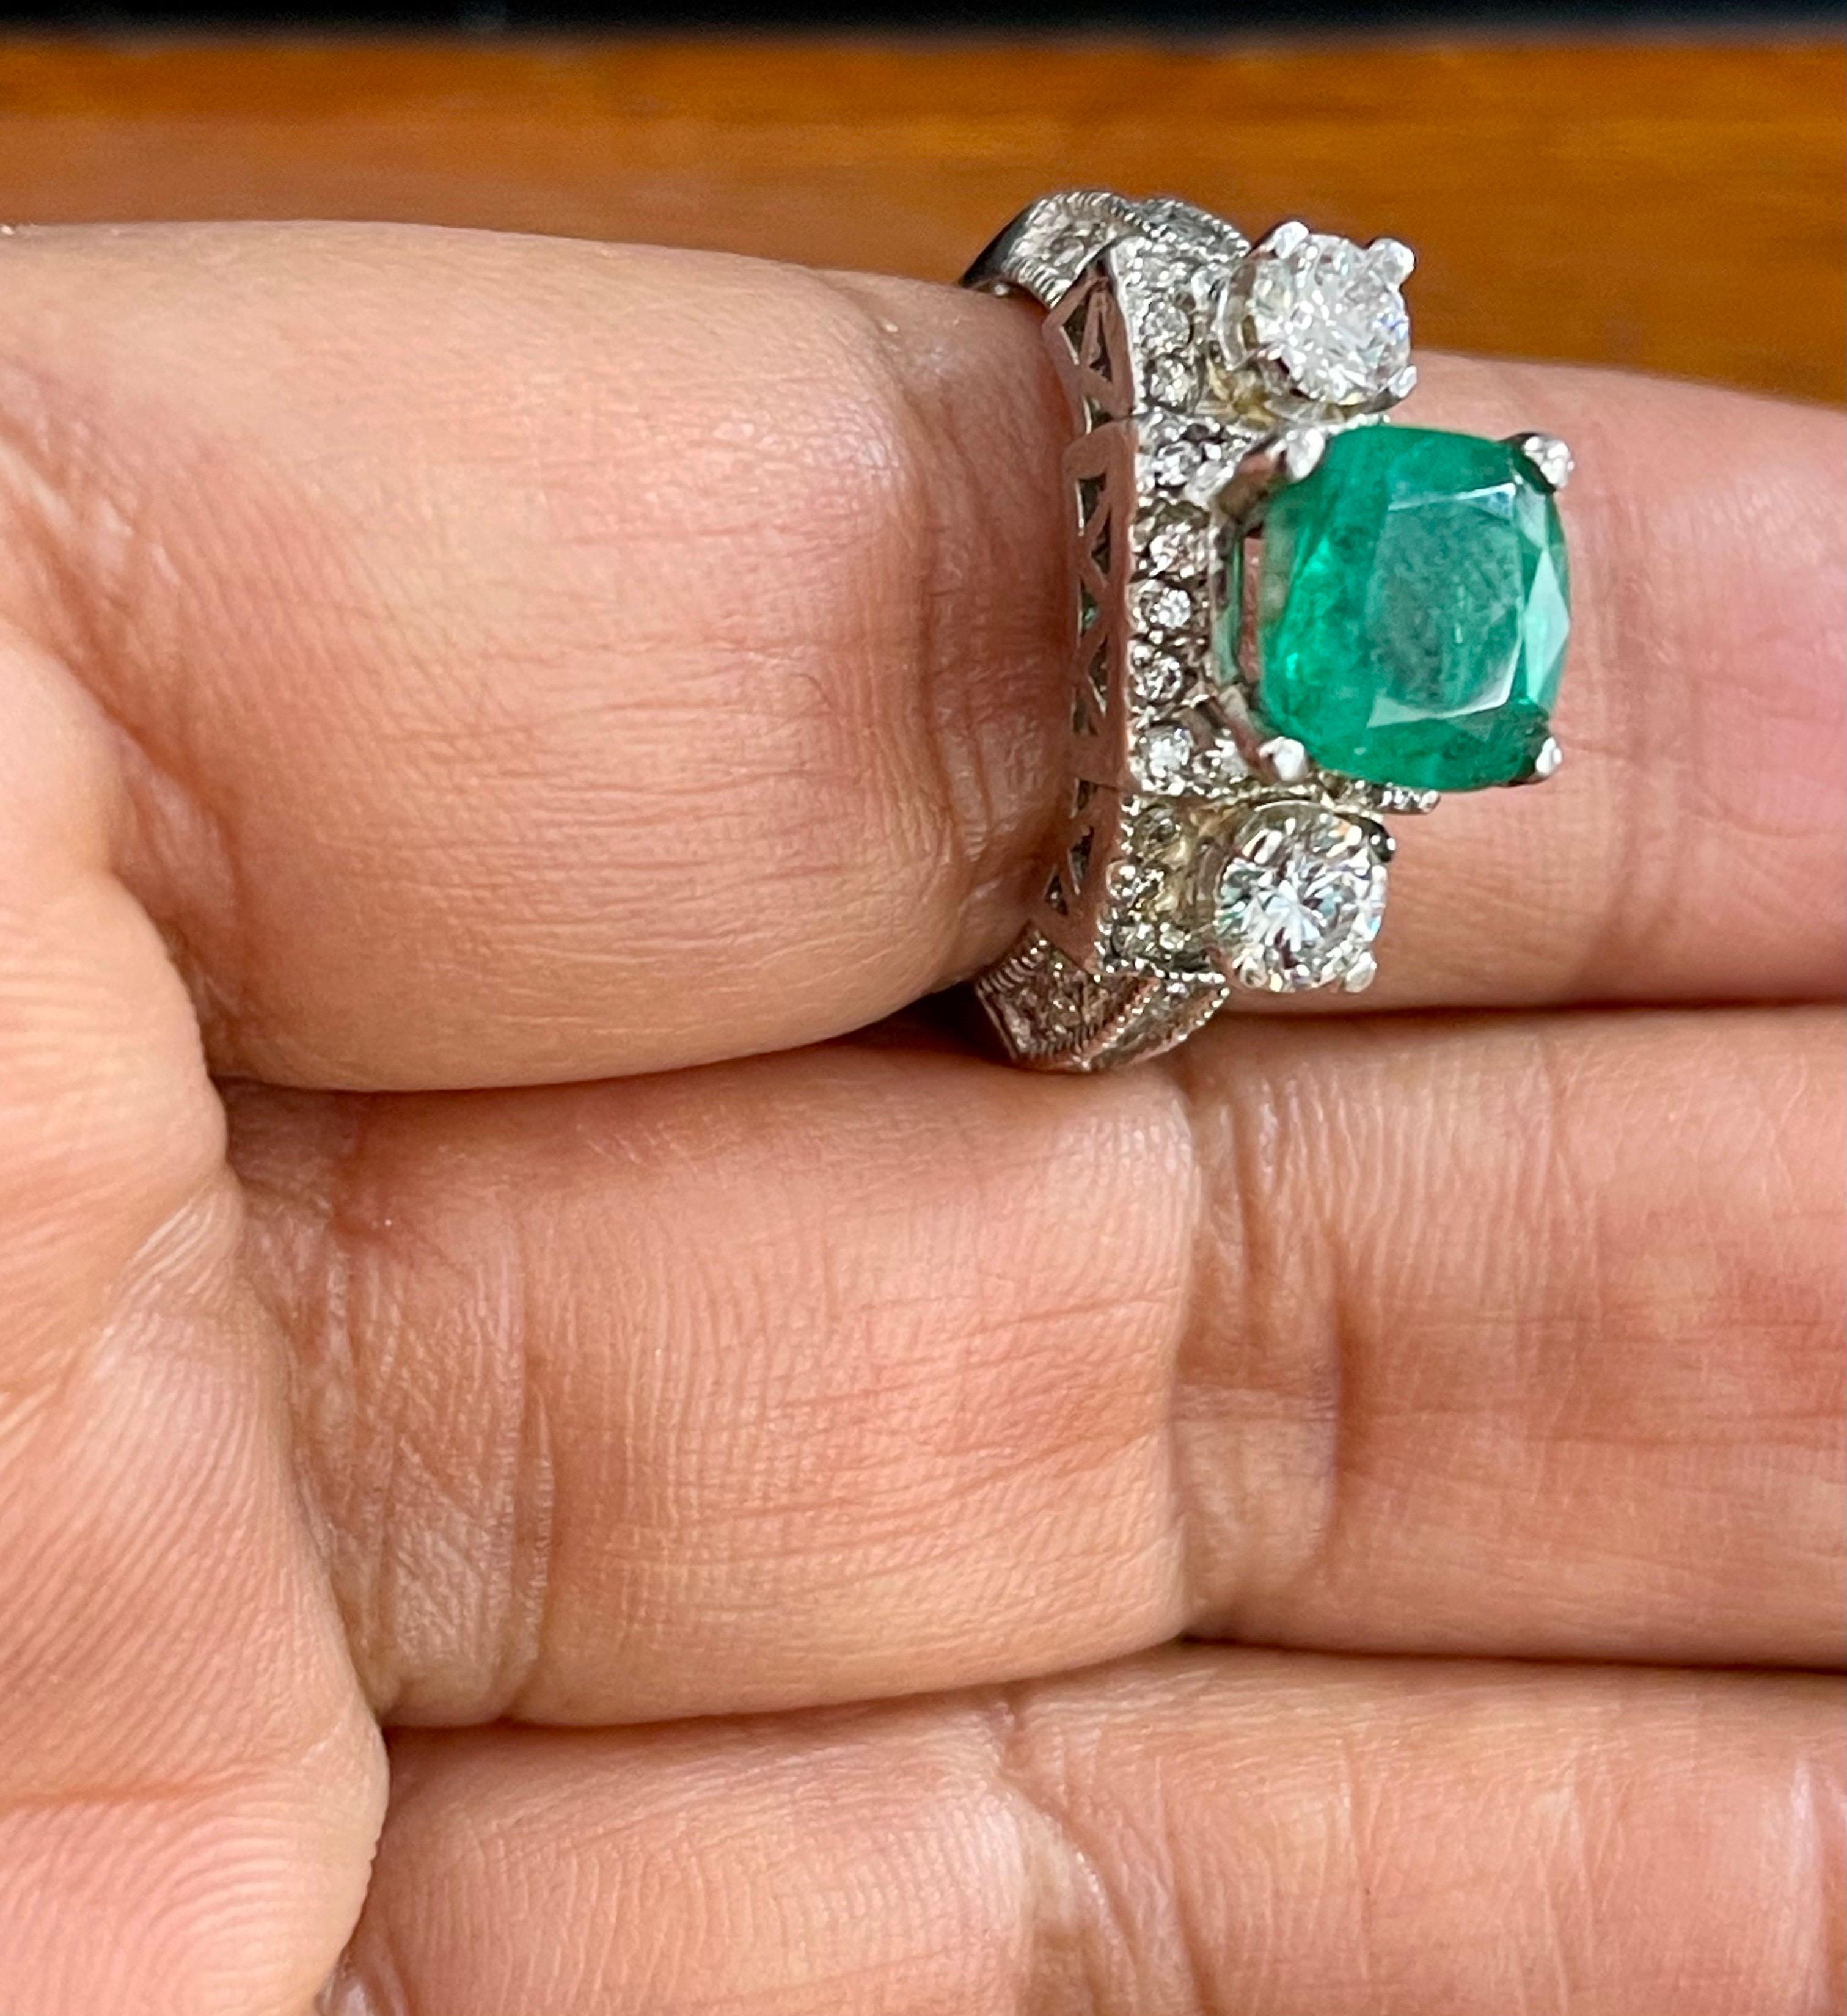 2 Carat Natural Cushion Cut Emerald & Diamond Ring 14 Karat White Gold In Excellent Condition For Sale In New York, NY